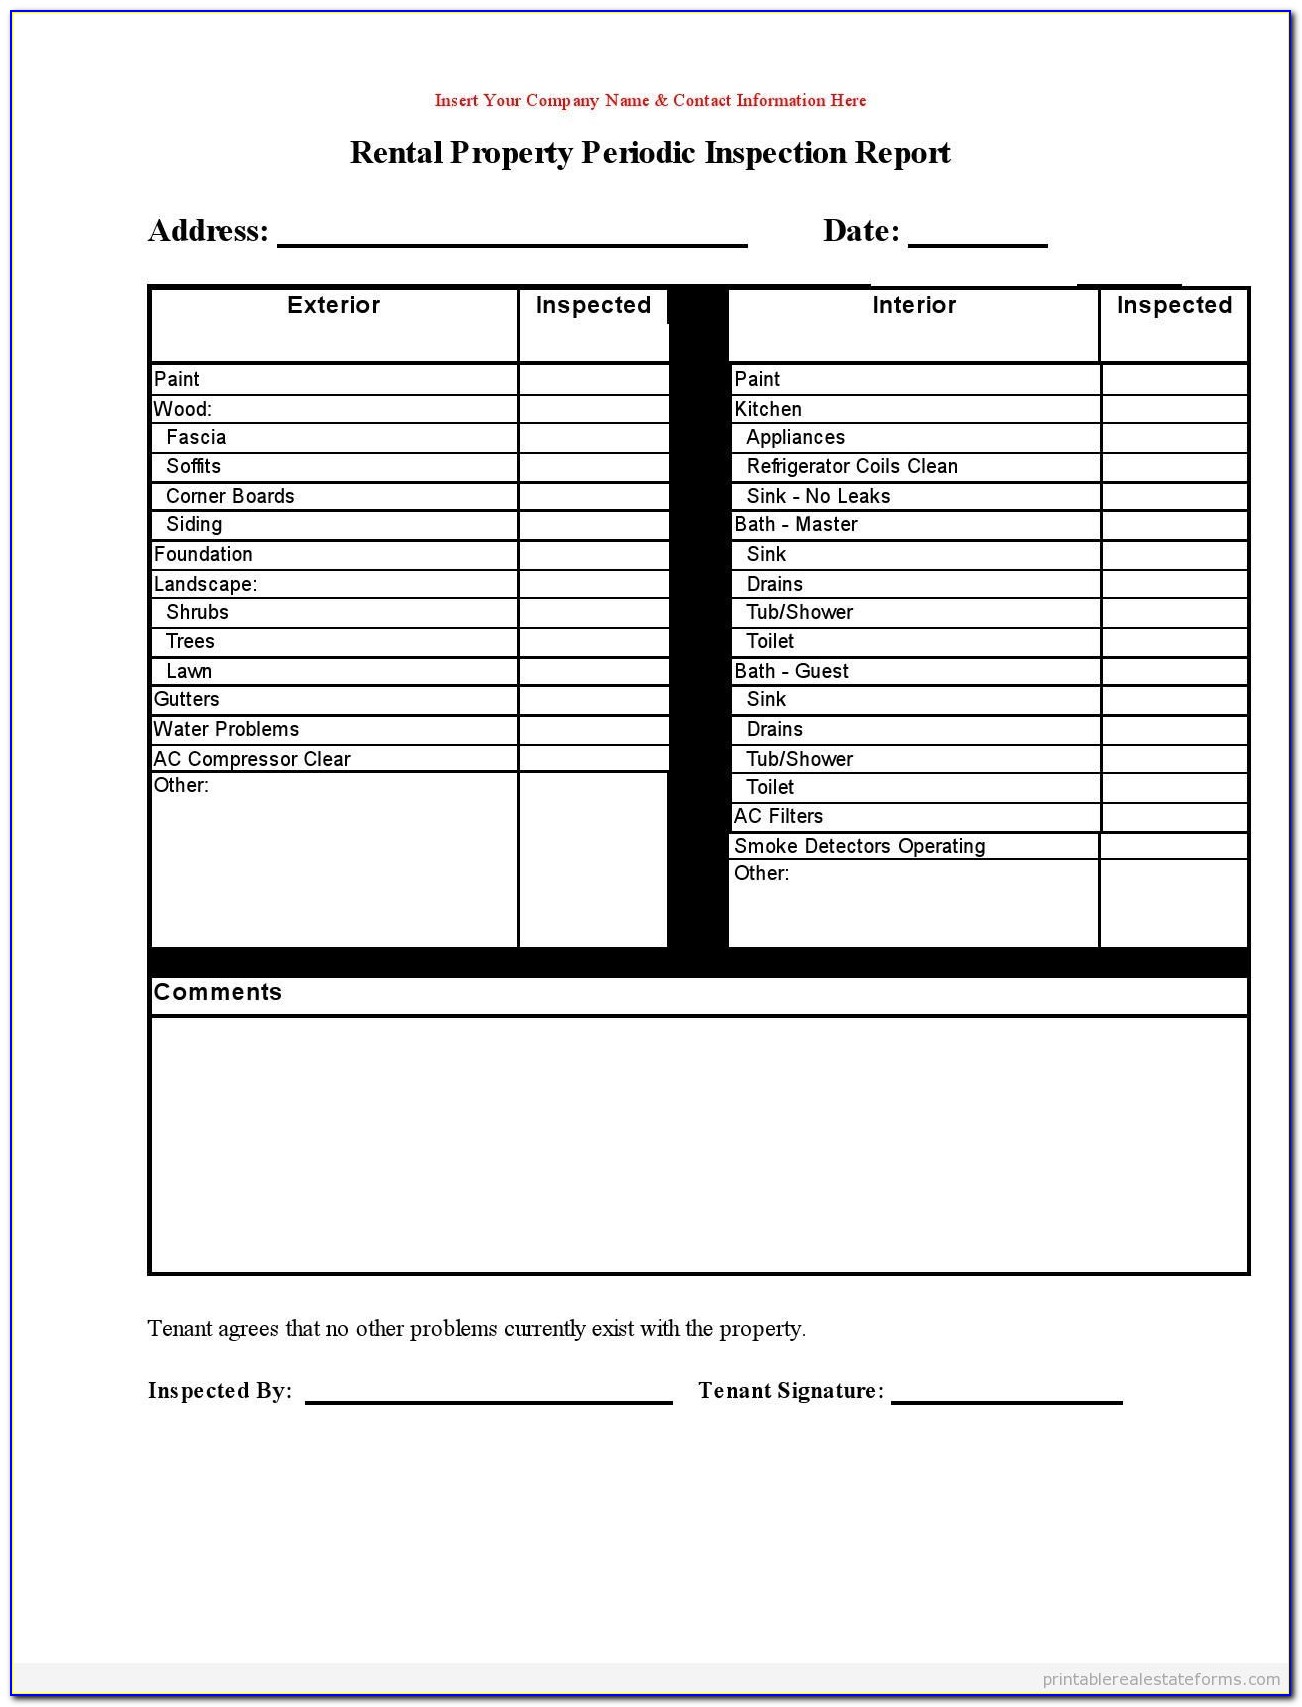 Landlord Property Inspection Checklist Template